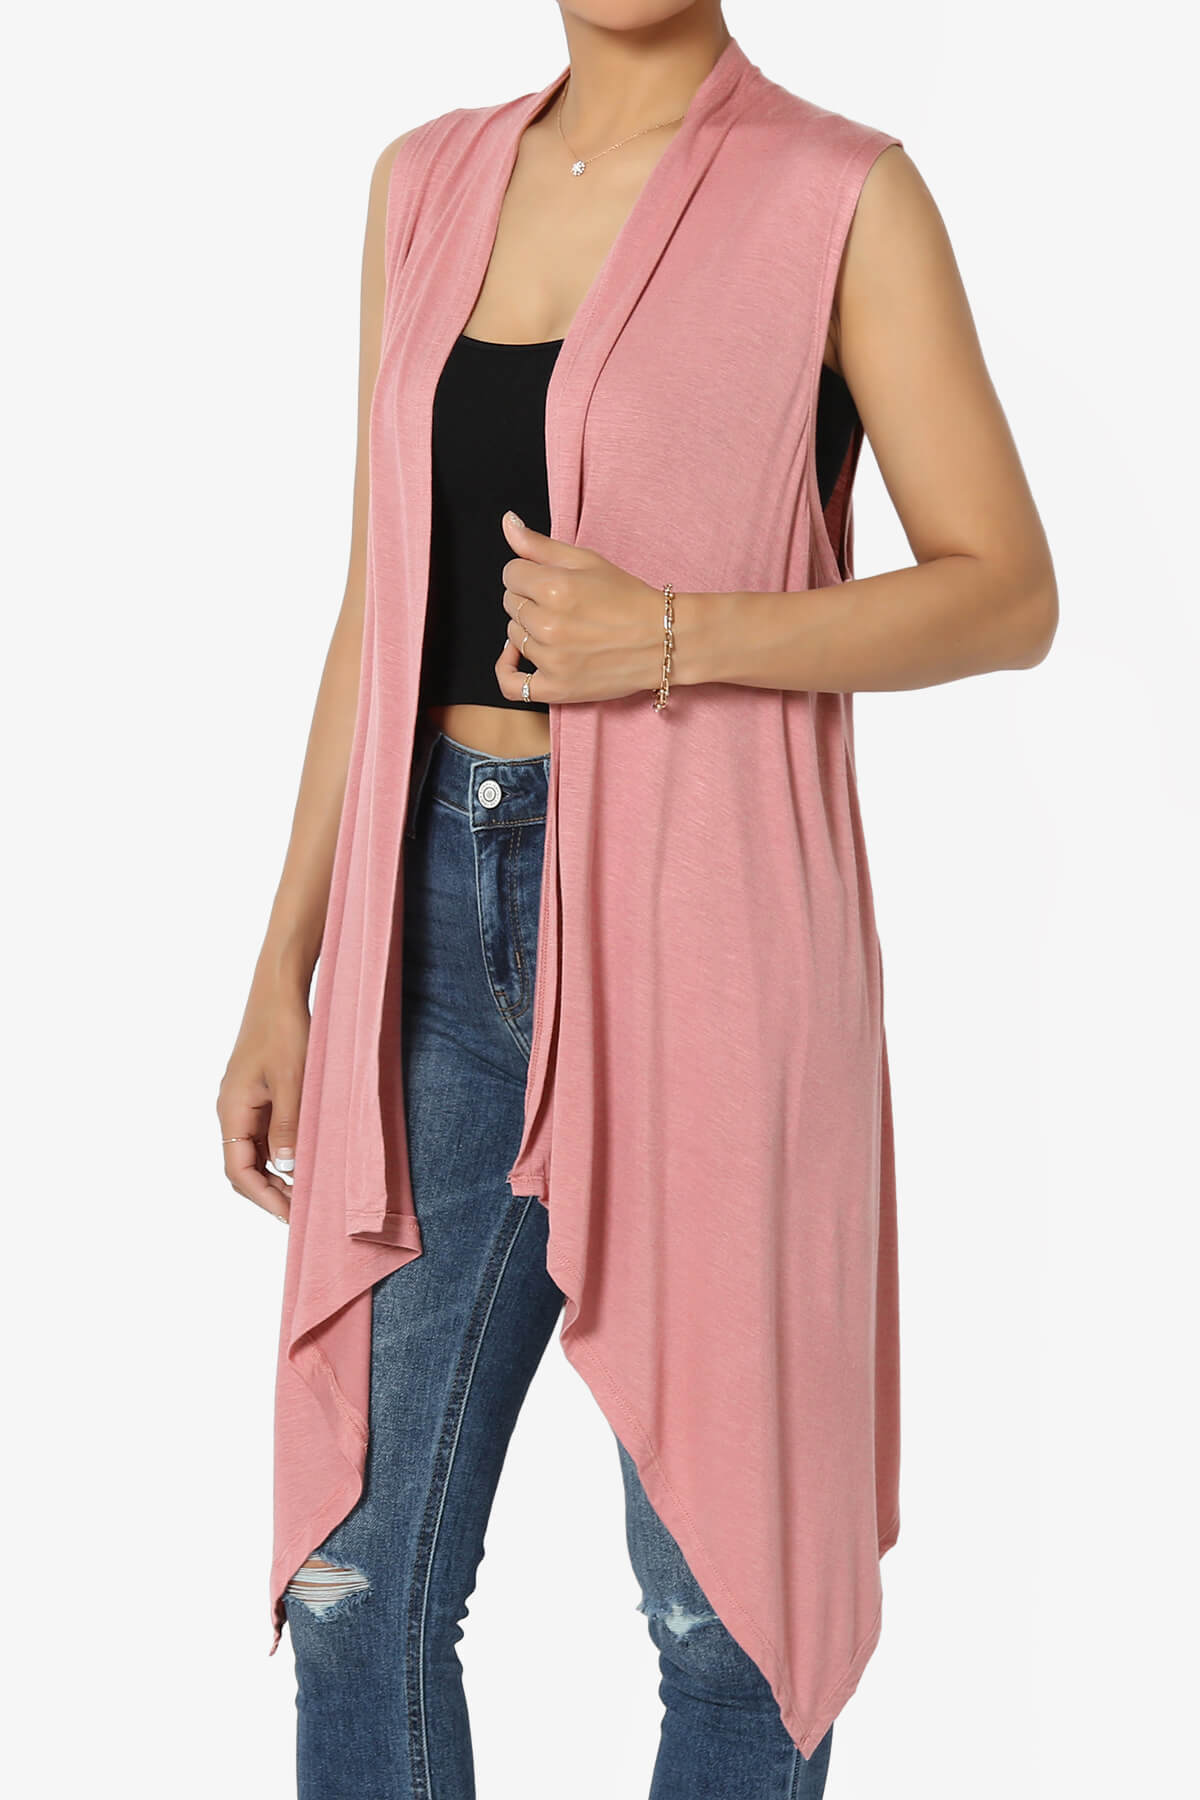 Load image into Gallery viewer, Taysom Draped Open Front Sleeveless Cardigan Vest ASH ROSE_3
